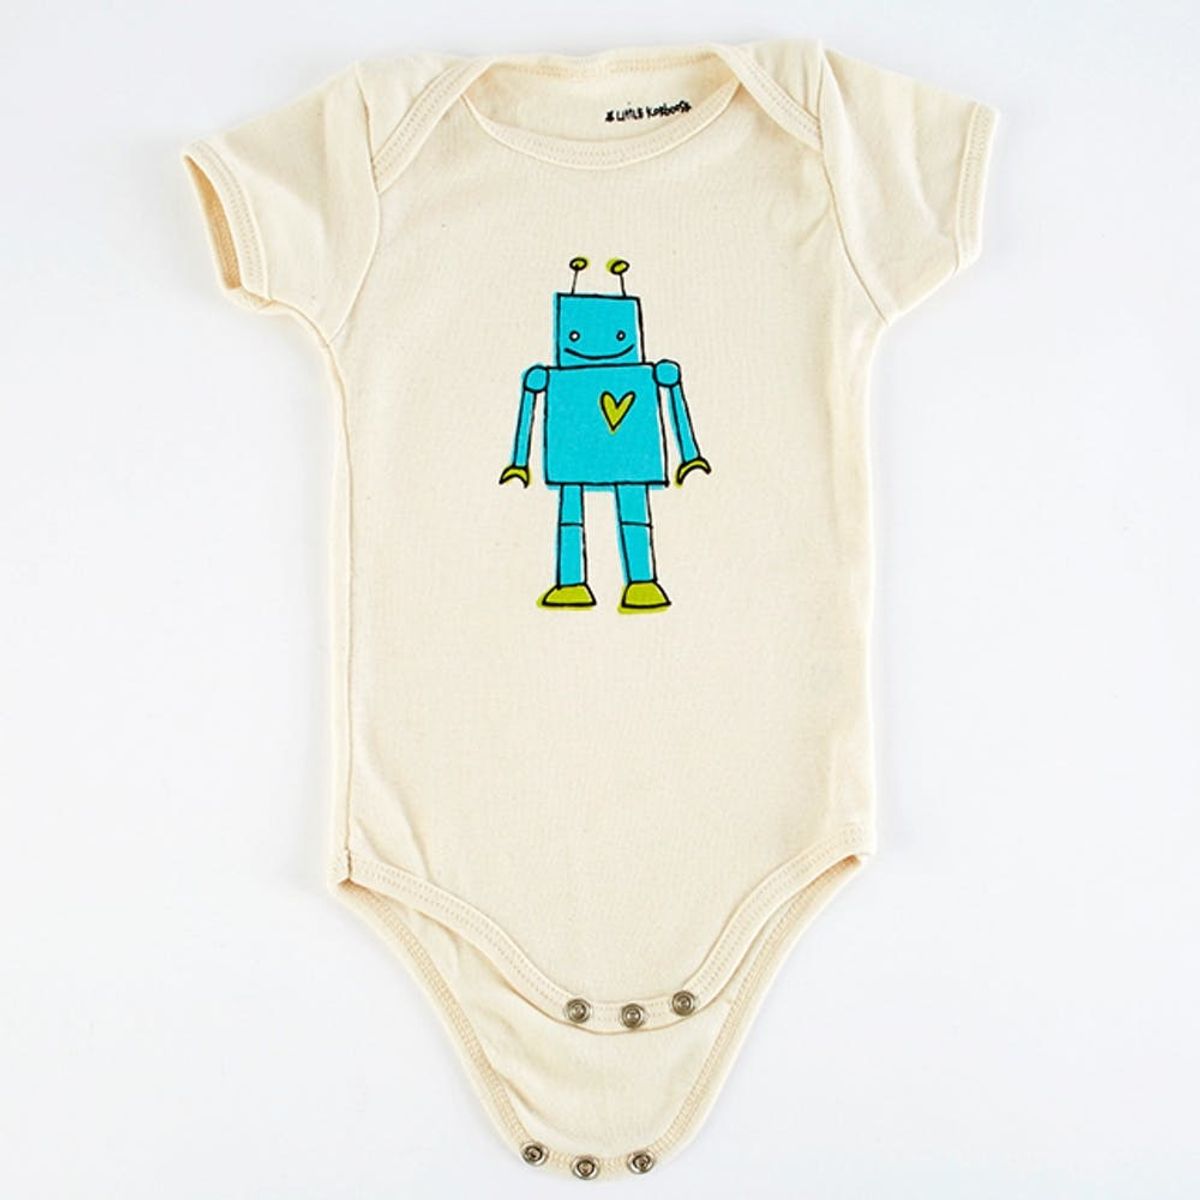 12 Baby Shower Gift Ideas When the Registry Is All Shopped Out